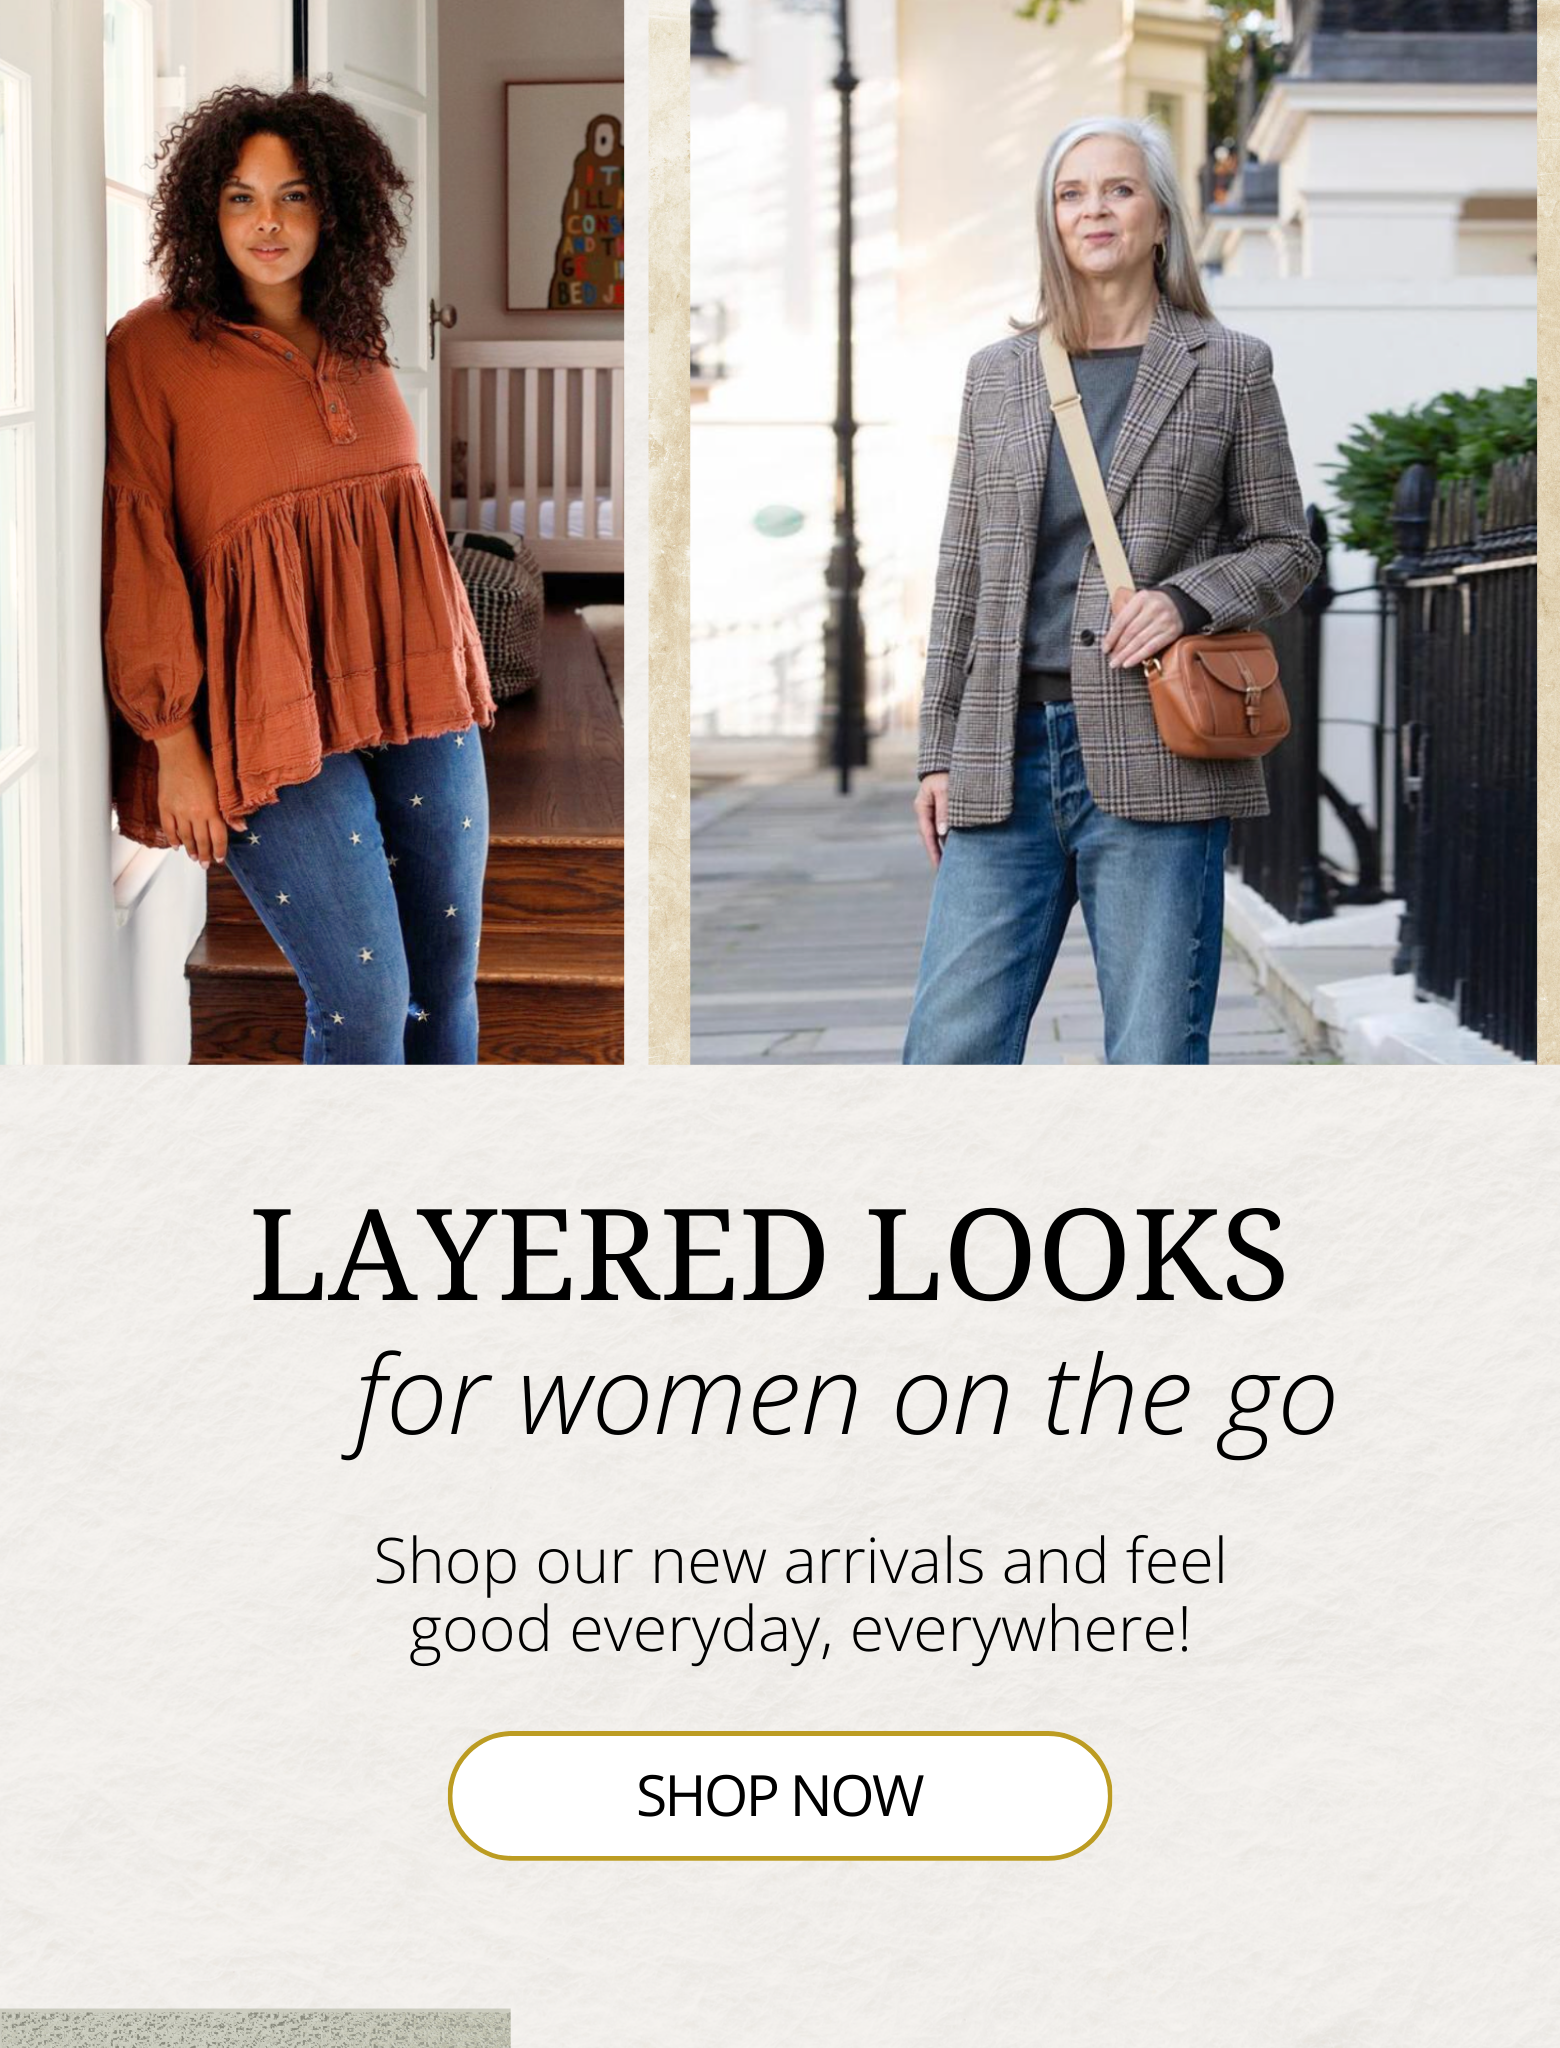 Layered Looks for the women on the go